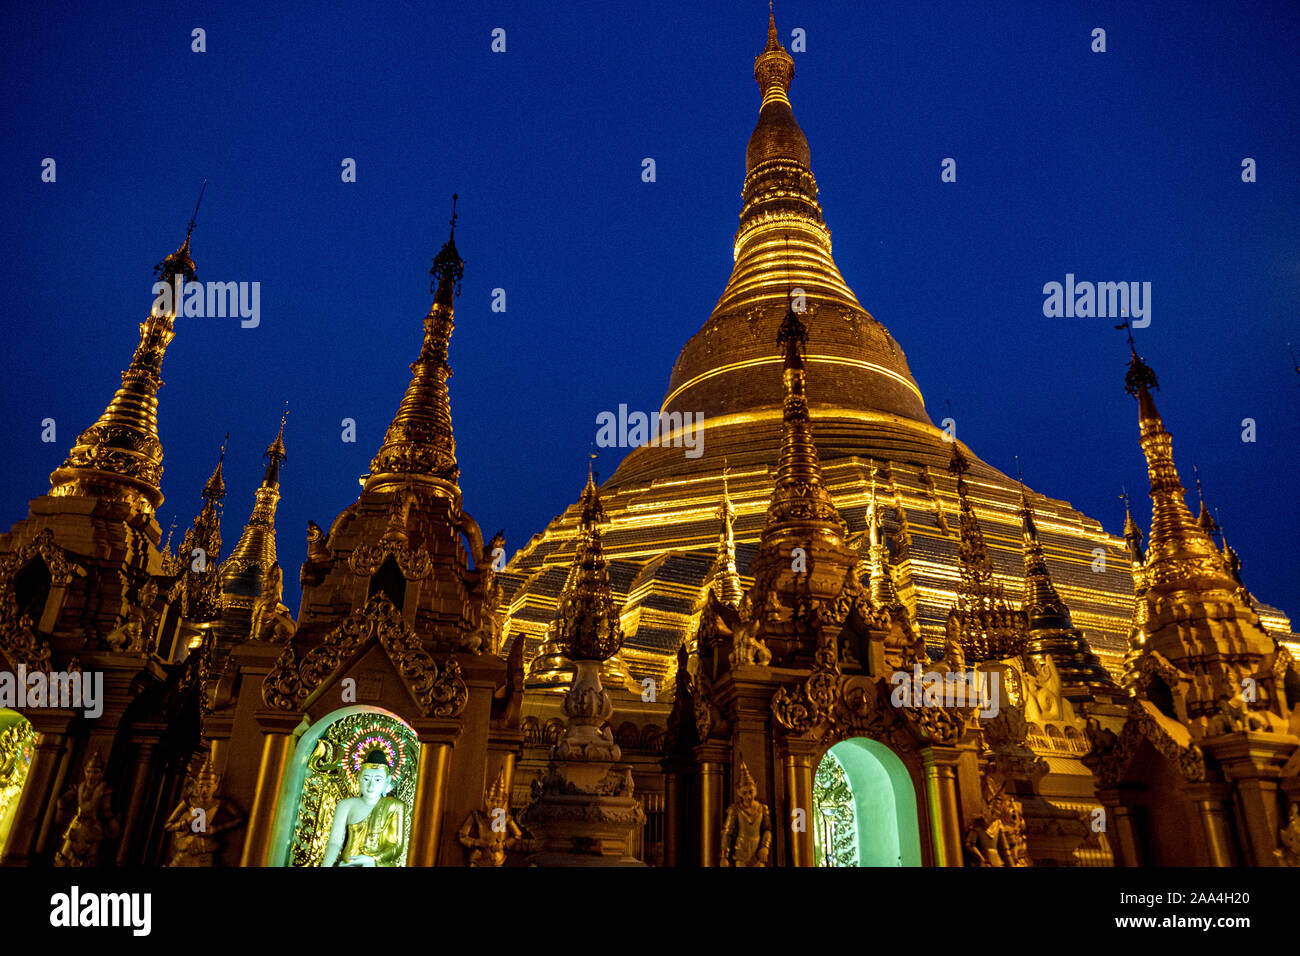 Shwedagon Pagoda and its numerous chapels in Yangon, Myanmar (Burma) against the background of a dark clear night sky Stock Photo